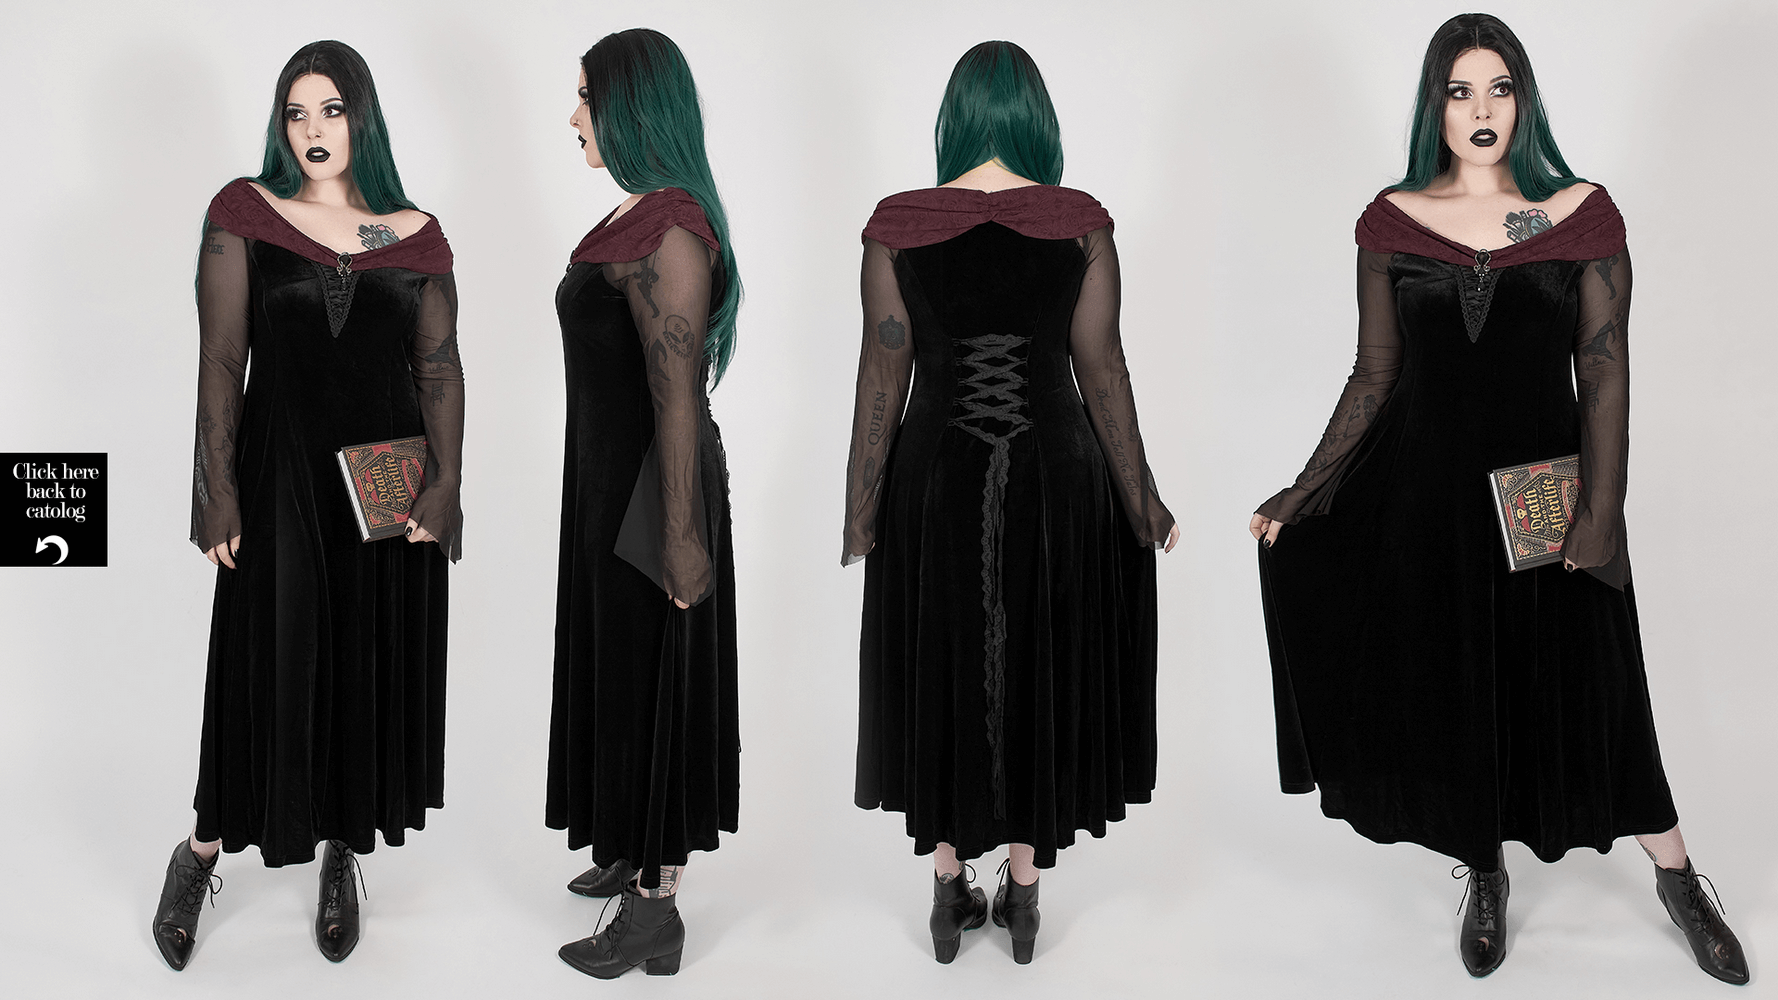 Victorian Gothic Velvet Gown with Brooch and Mesh Sleeves - HARD'N'HEAVY